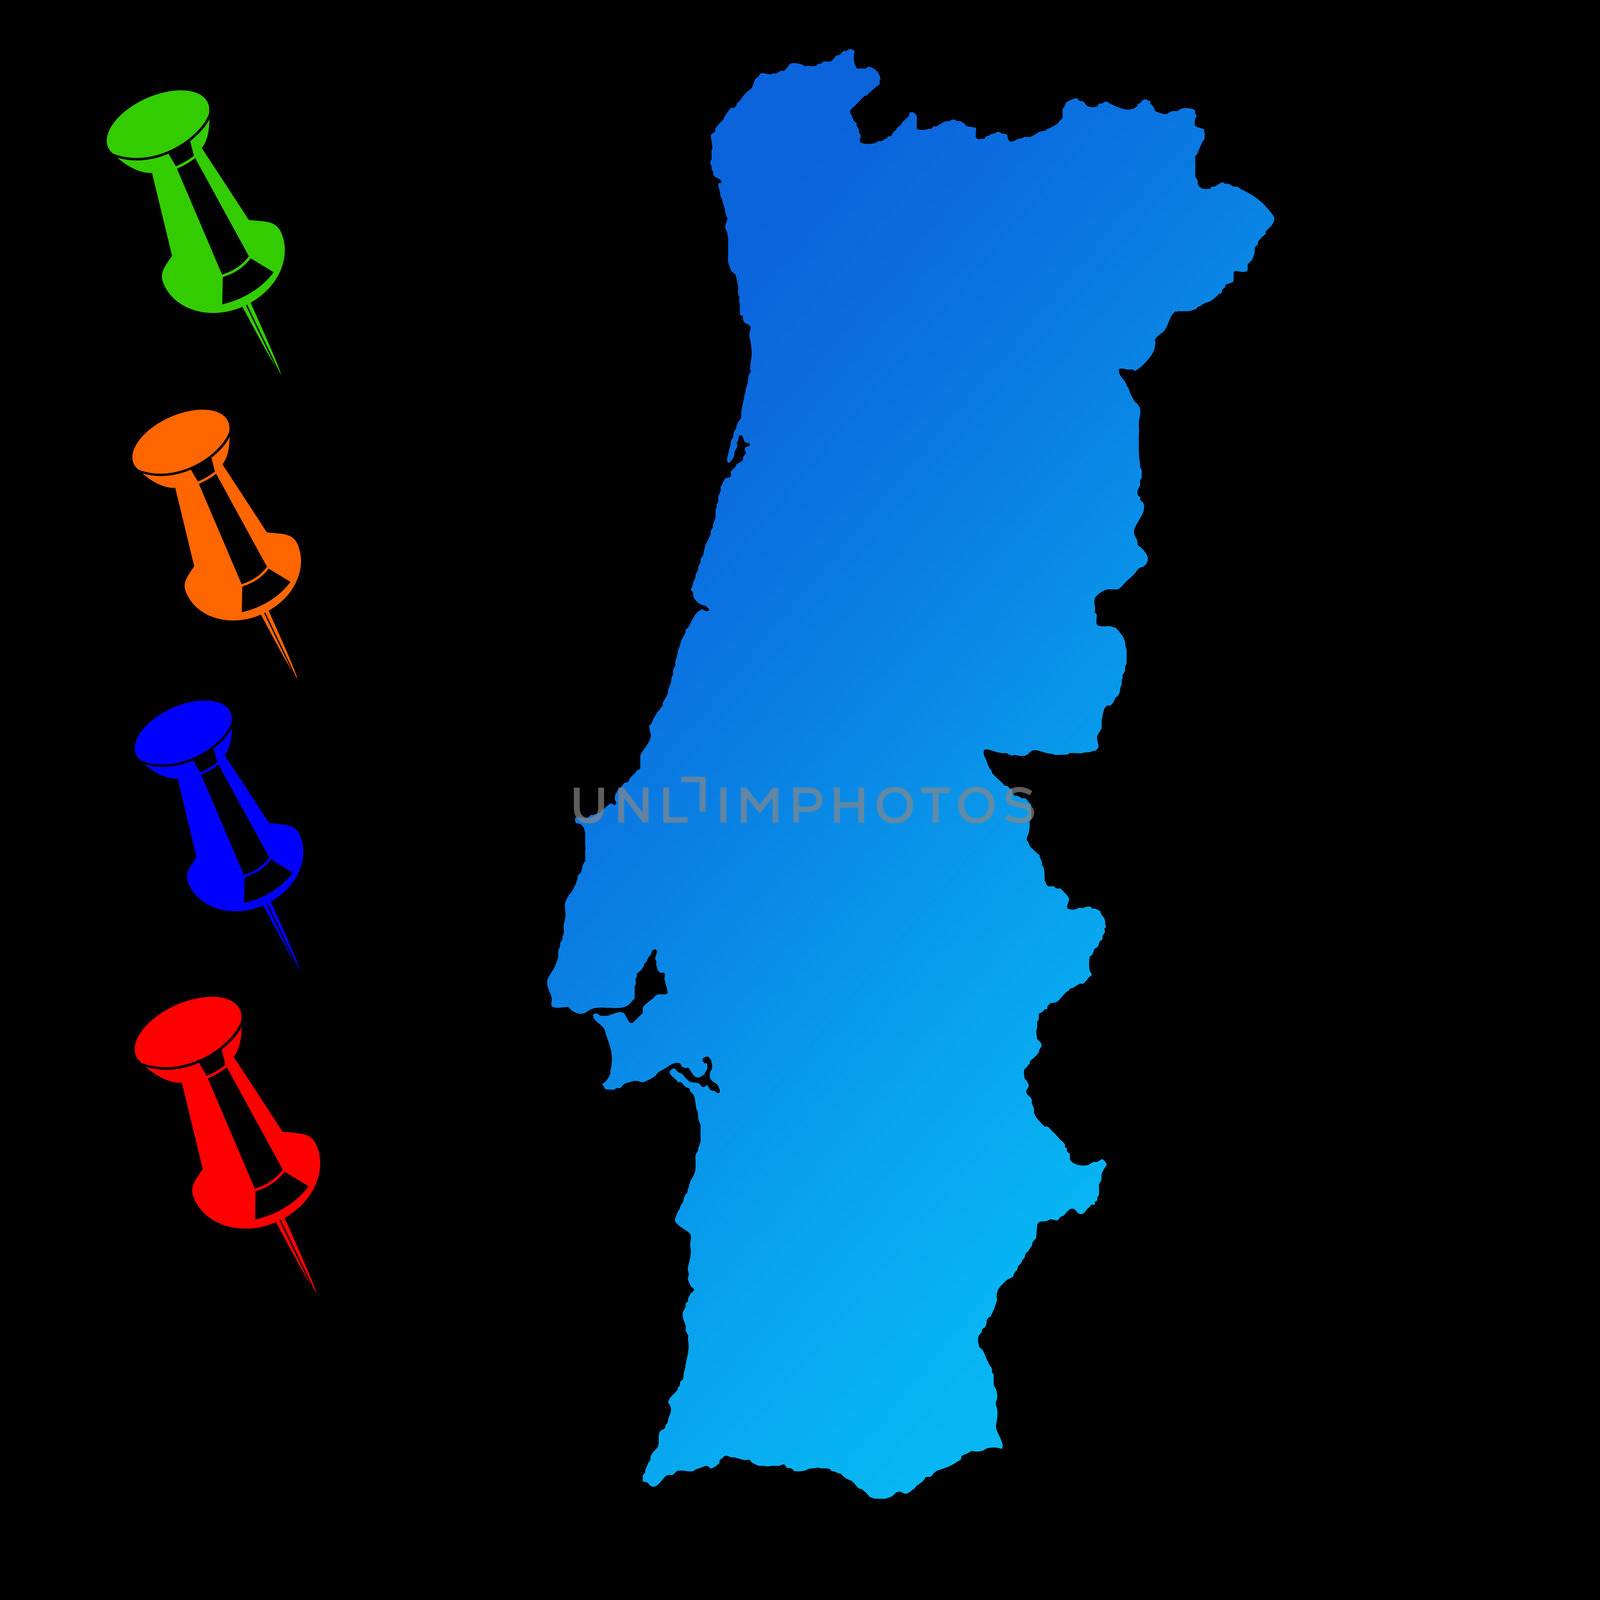 Portugal travel map by speedfighter